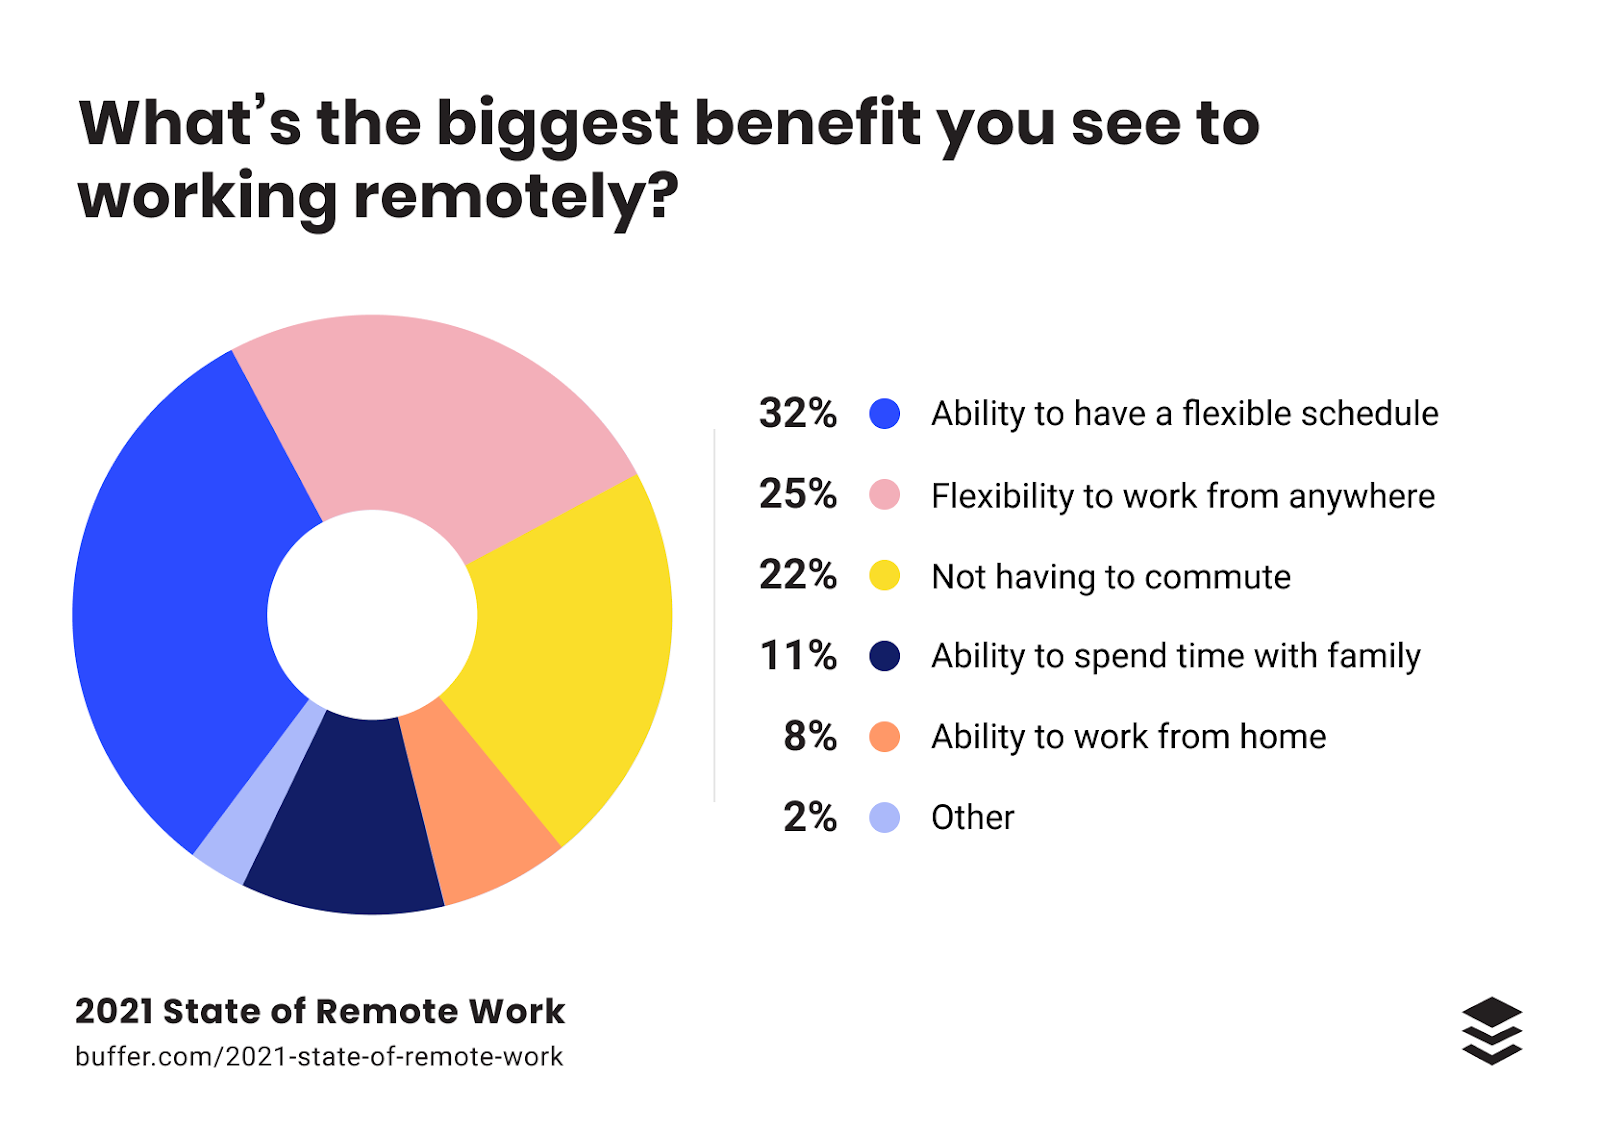 Benefits of working remotely - some advantages of remote work setups include the flexibility anytime and anywhere, the time saved to spend more time with family.